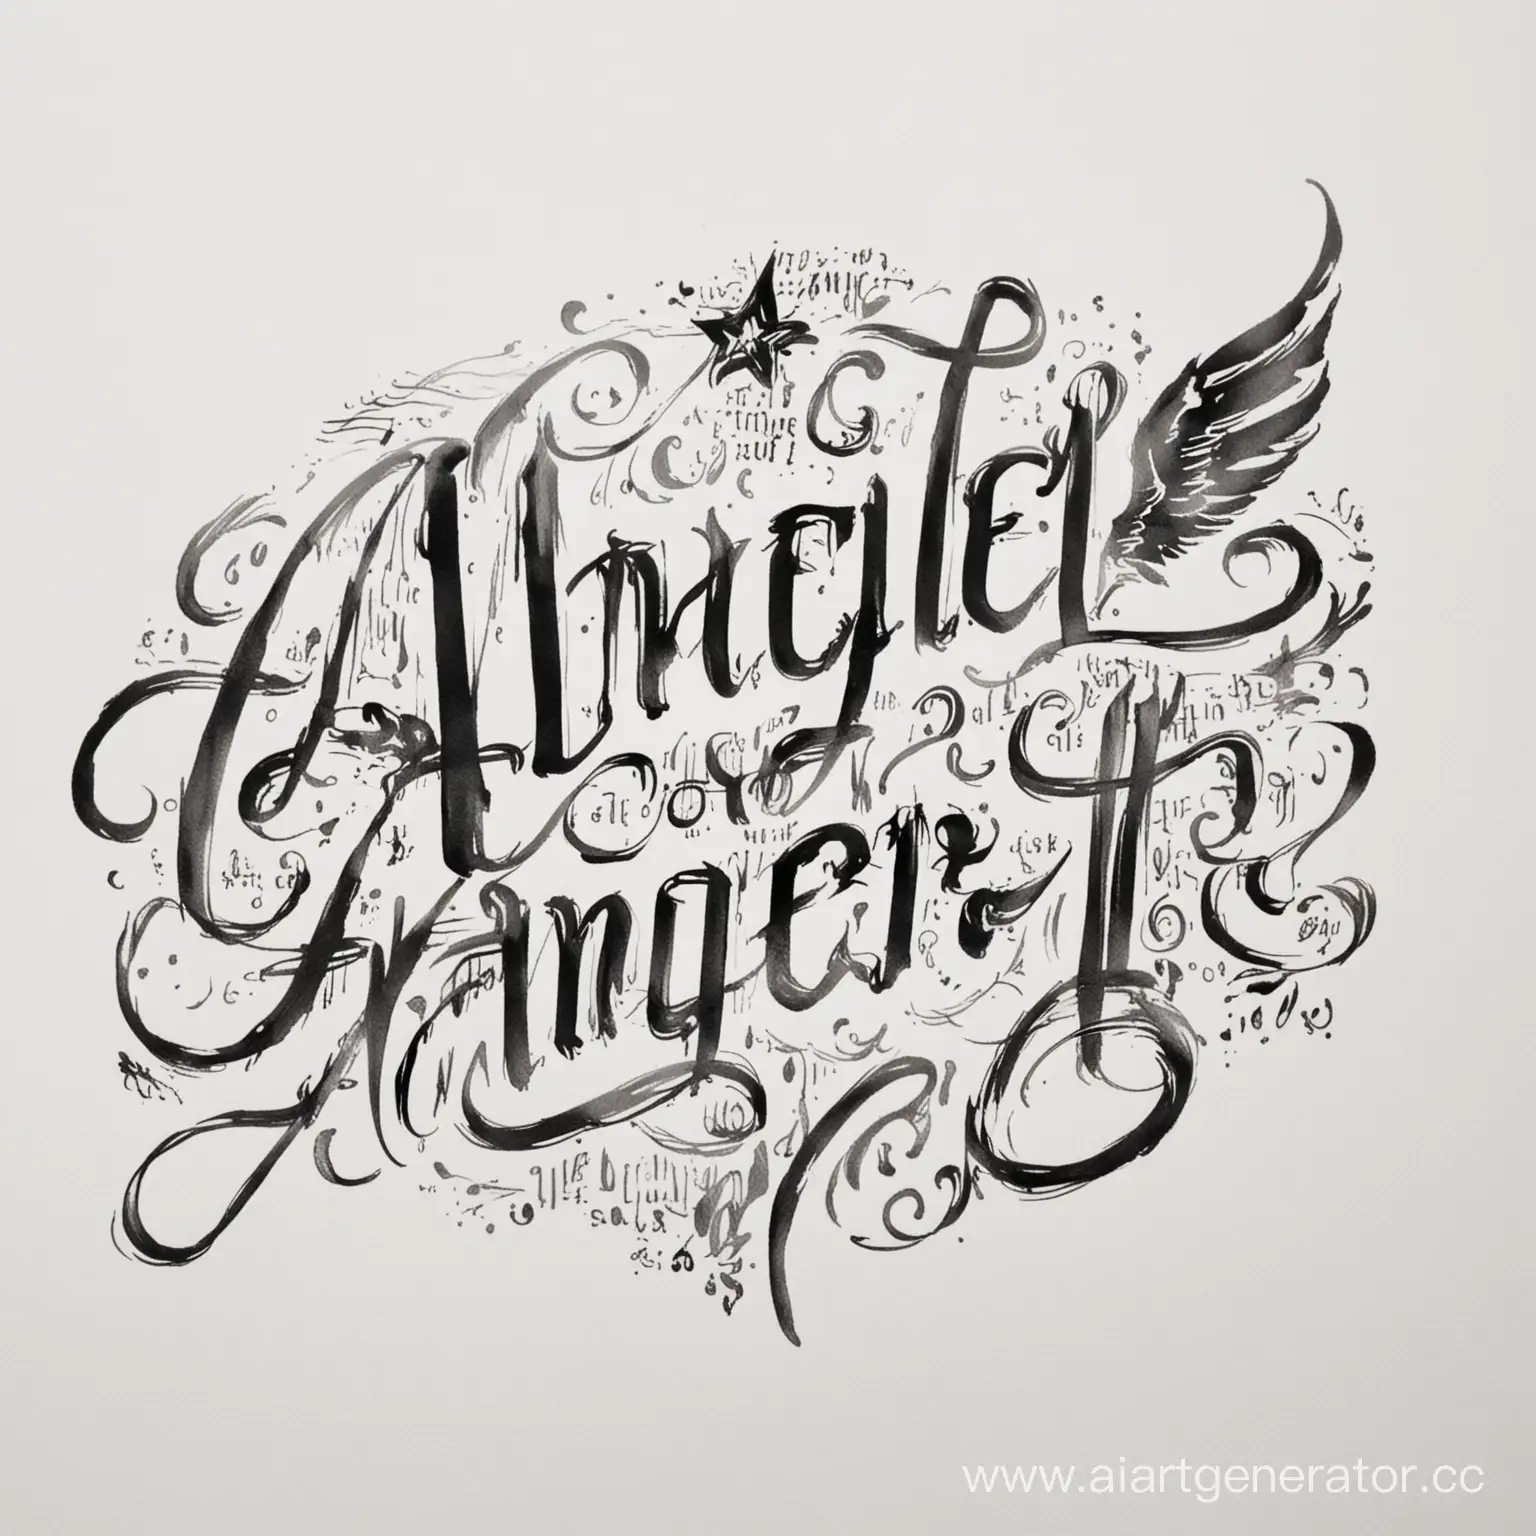 Elegant-Calligraphy-of-ANGEL-NEVER-DIE-on-White-Background